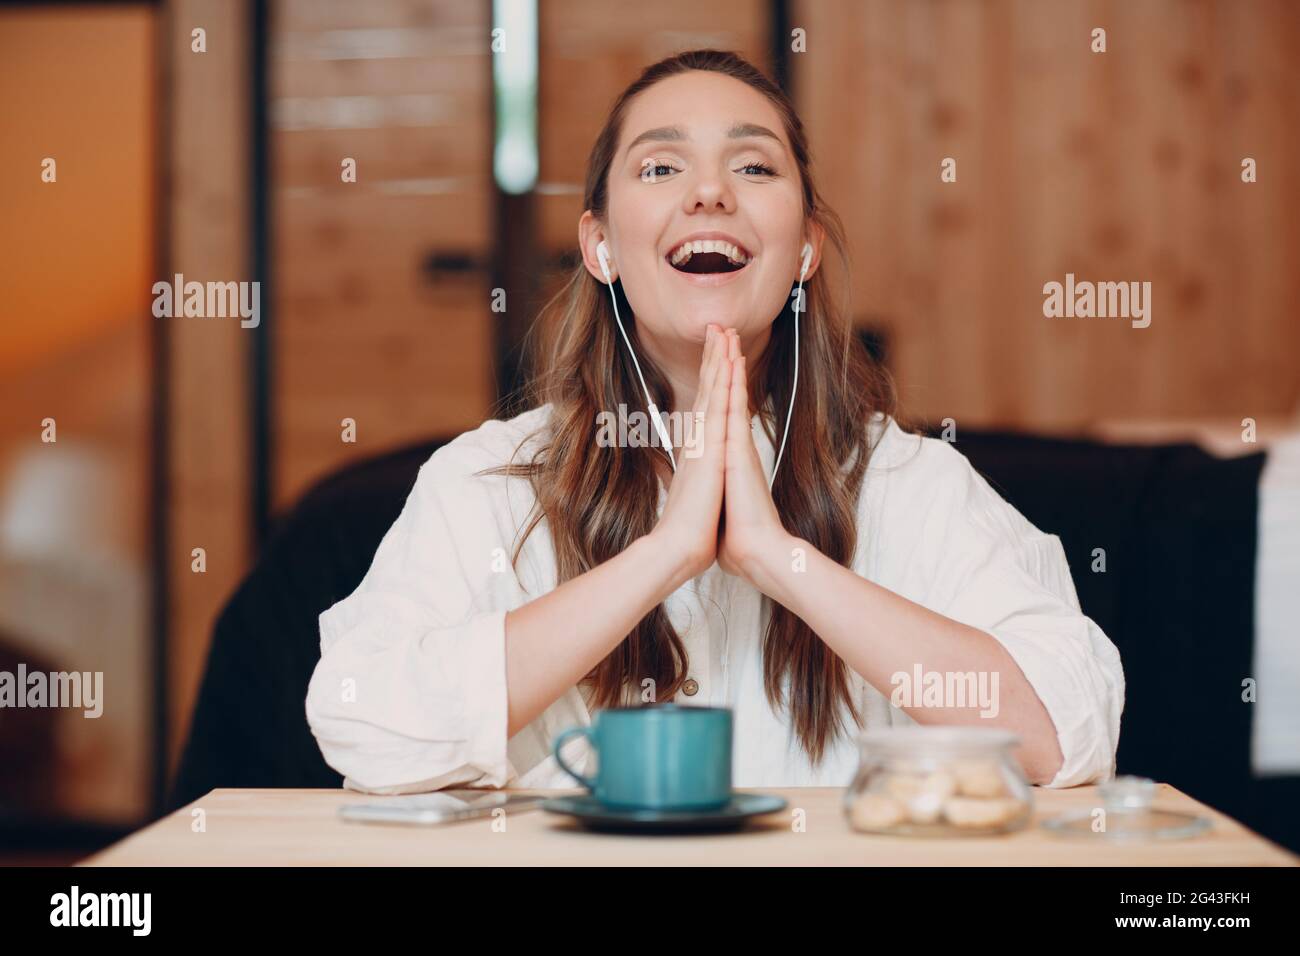 Screen app view of smiling young female sit at table with laptop and talking on video call with friend or co worker, happy girl Stock Photo